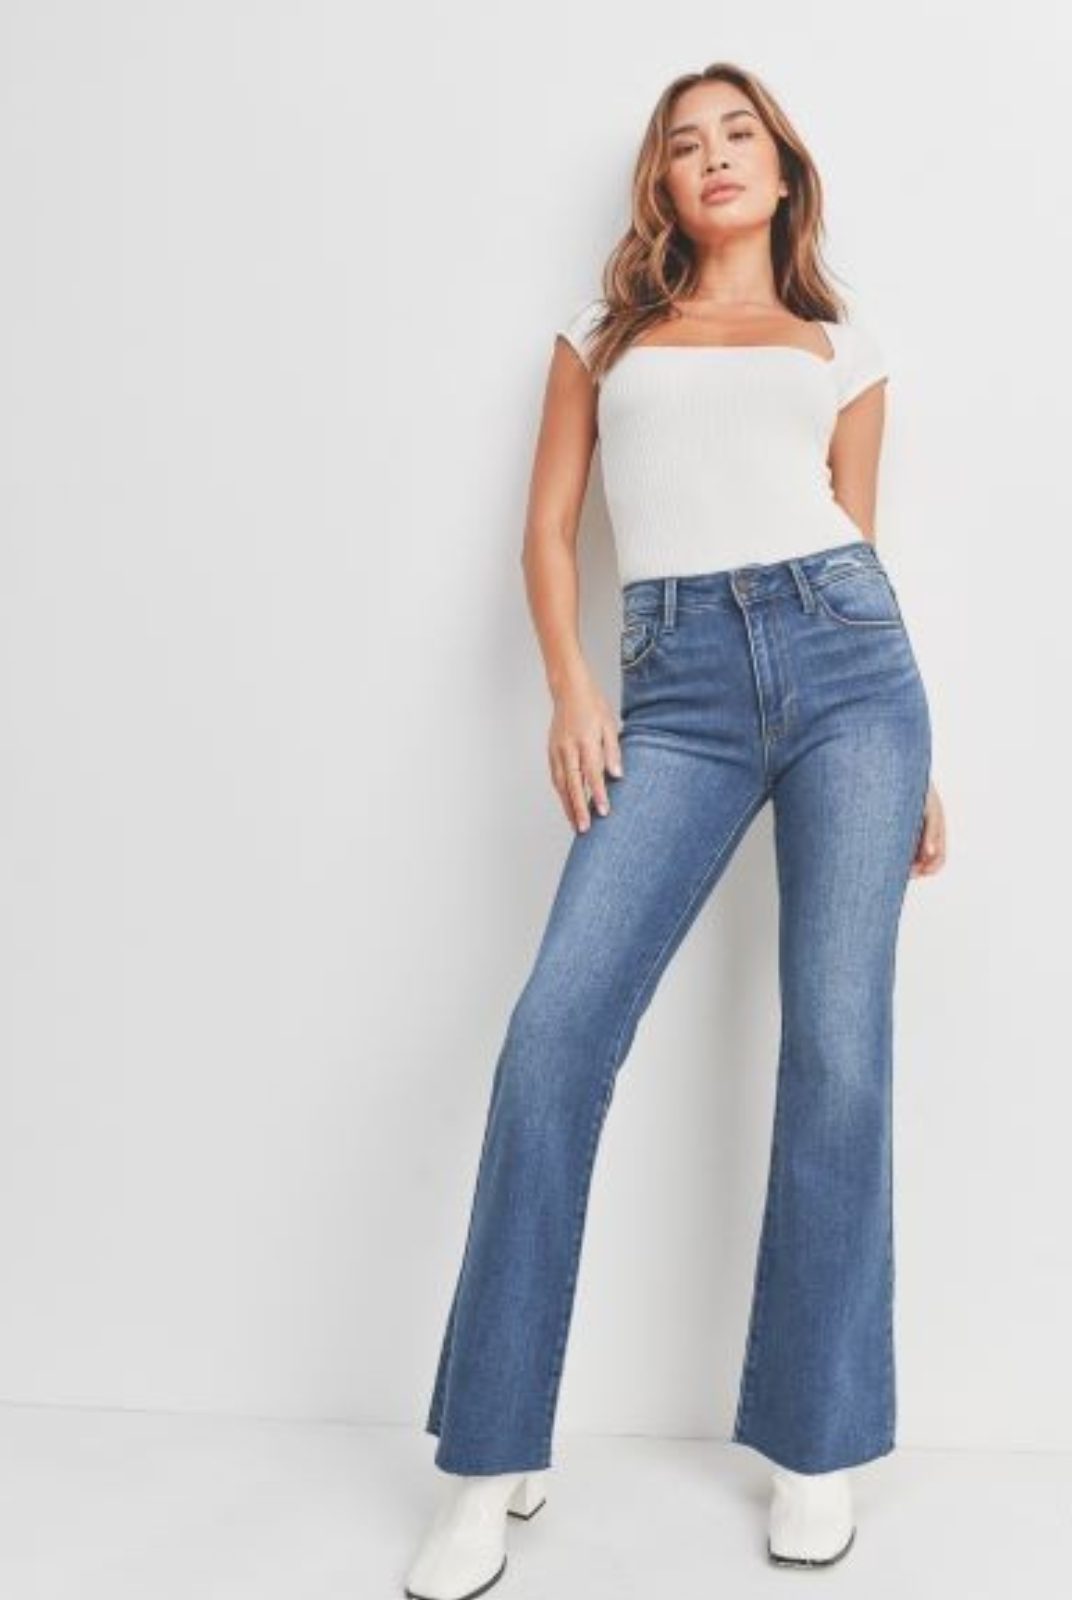 Just Black Flare Jean. Get ready to fall in love with our favorite jean of the season. We took this classic silhouette, and gave it an updated wash and scissor cut hem to make it the ultimate jean for dressing up and dressing down.